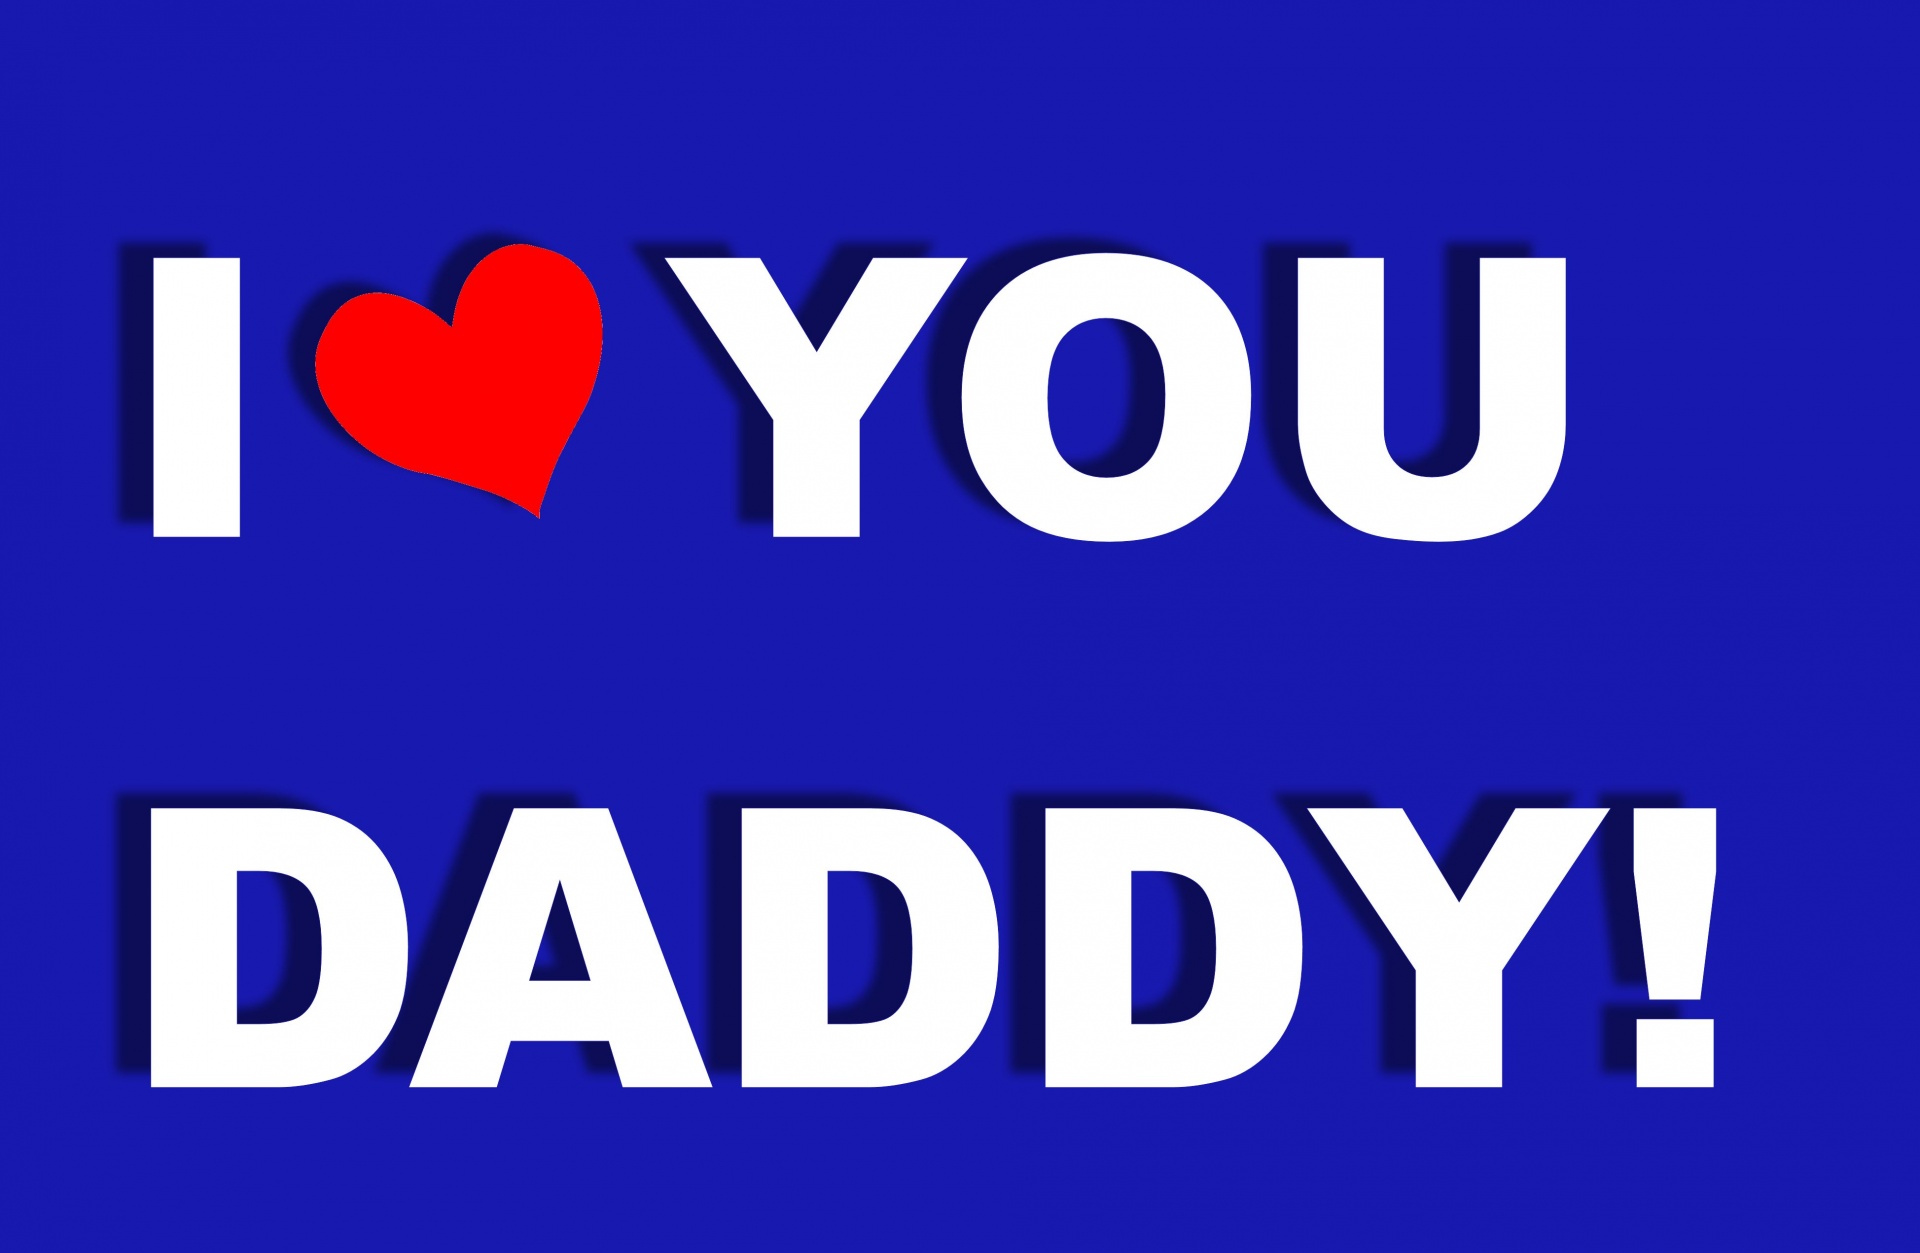 Download Free Photo Of I Love You Daddy Poster Background Heart From Needpix Com